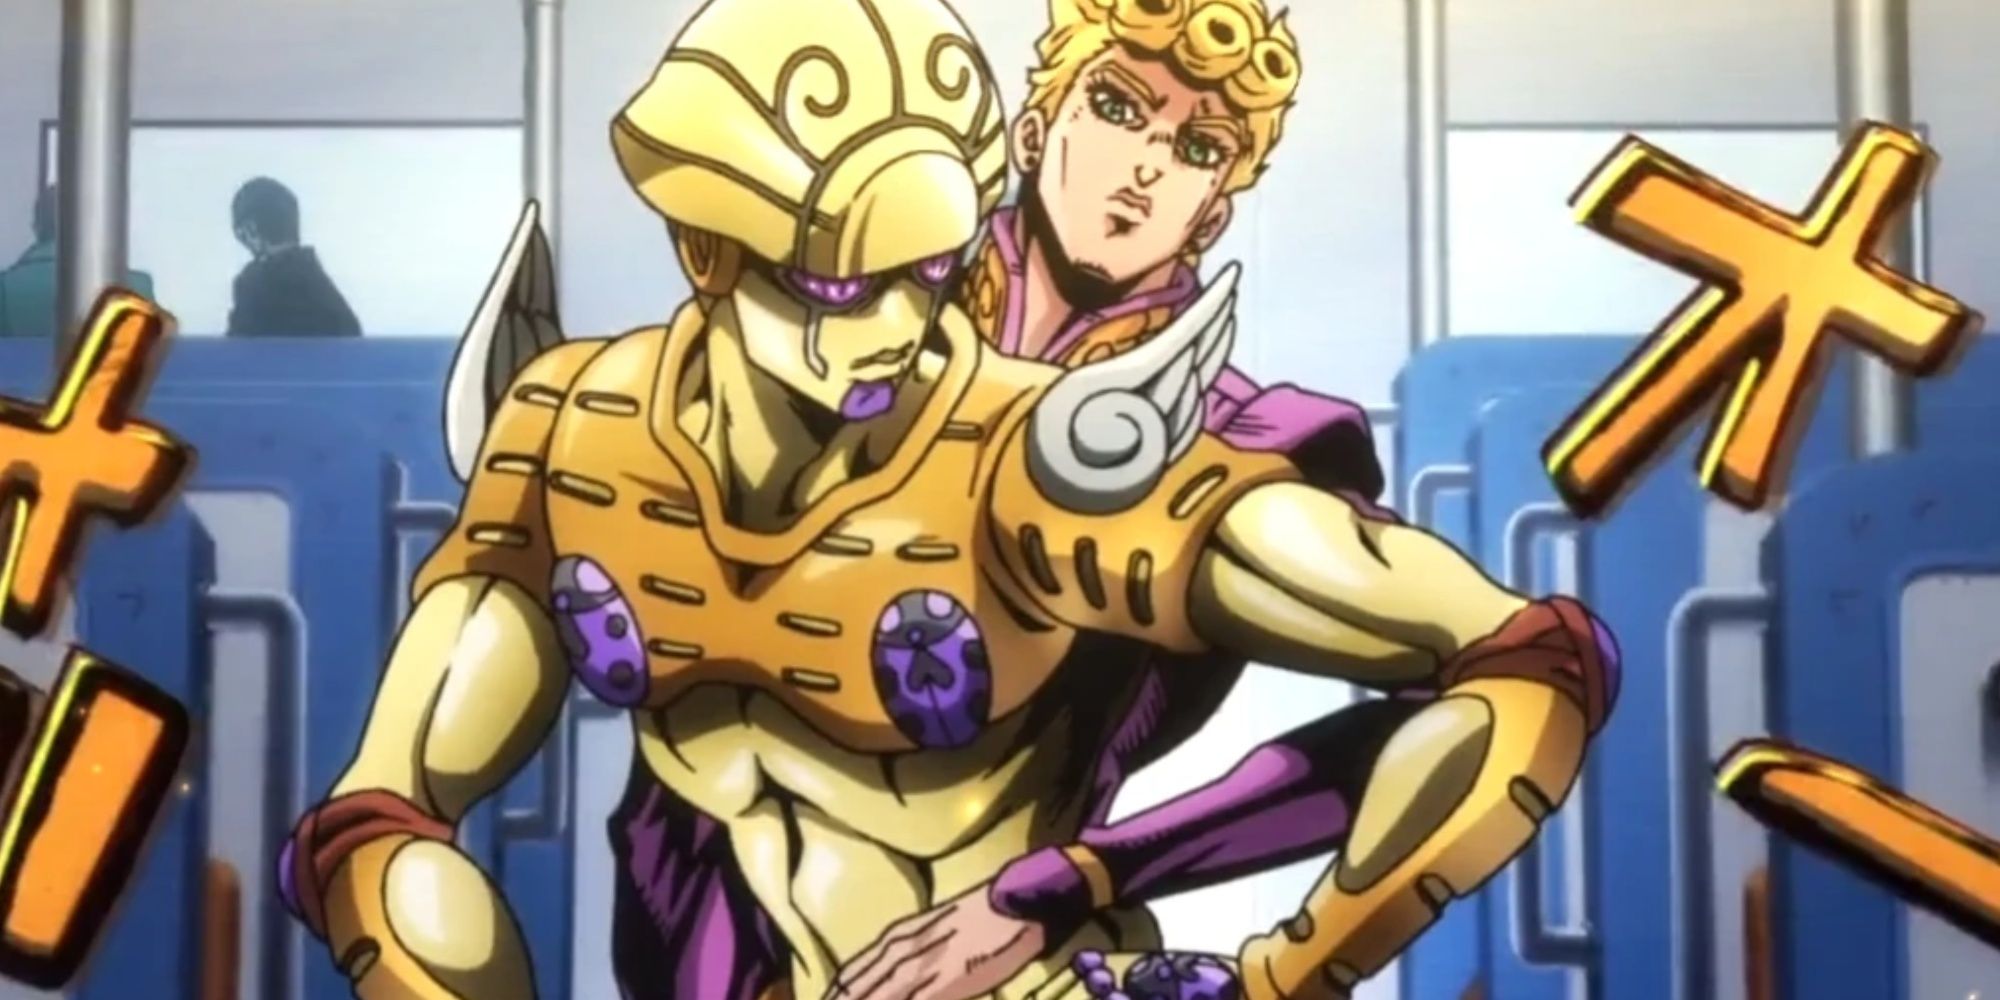 Is it possible to do all those fabulous poses depicted in JoJo's Bizarre  Adventure series, anime and manga or both? - Quora